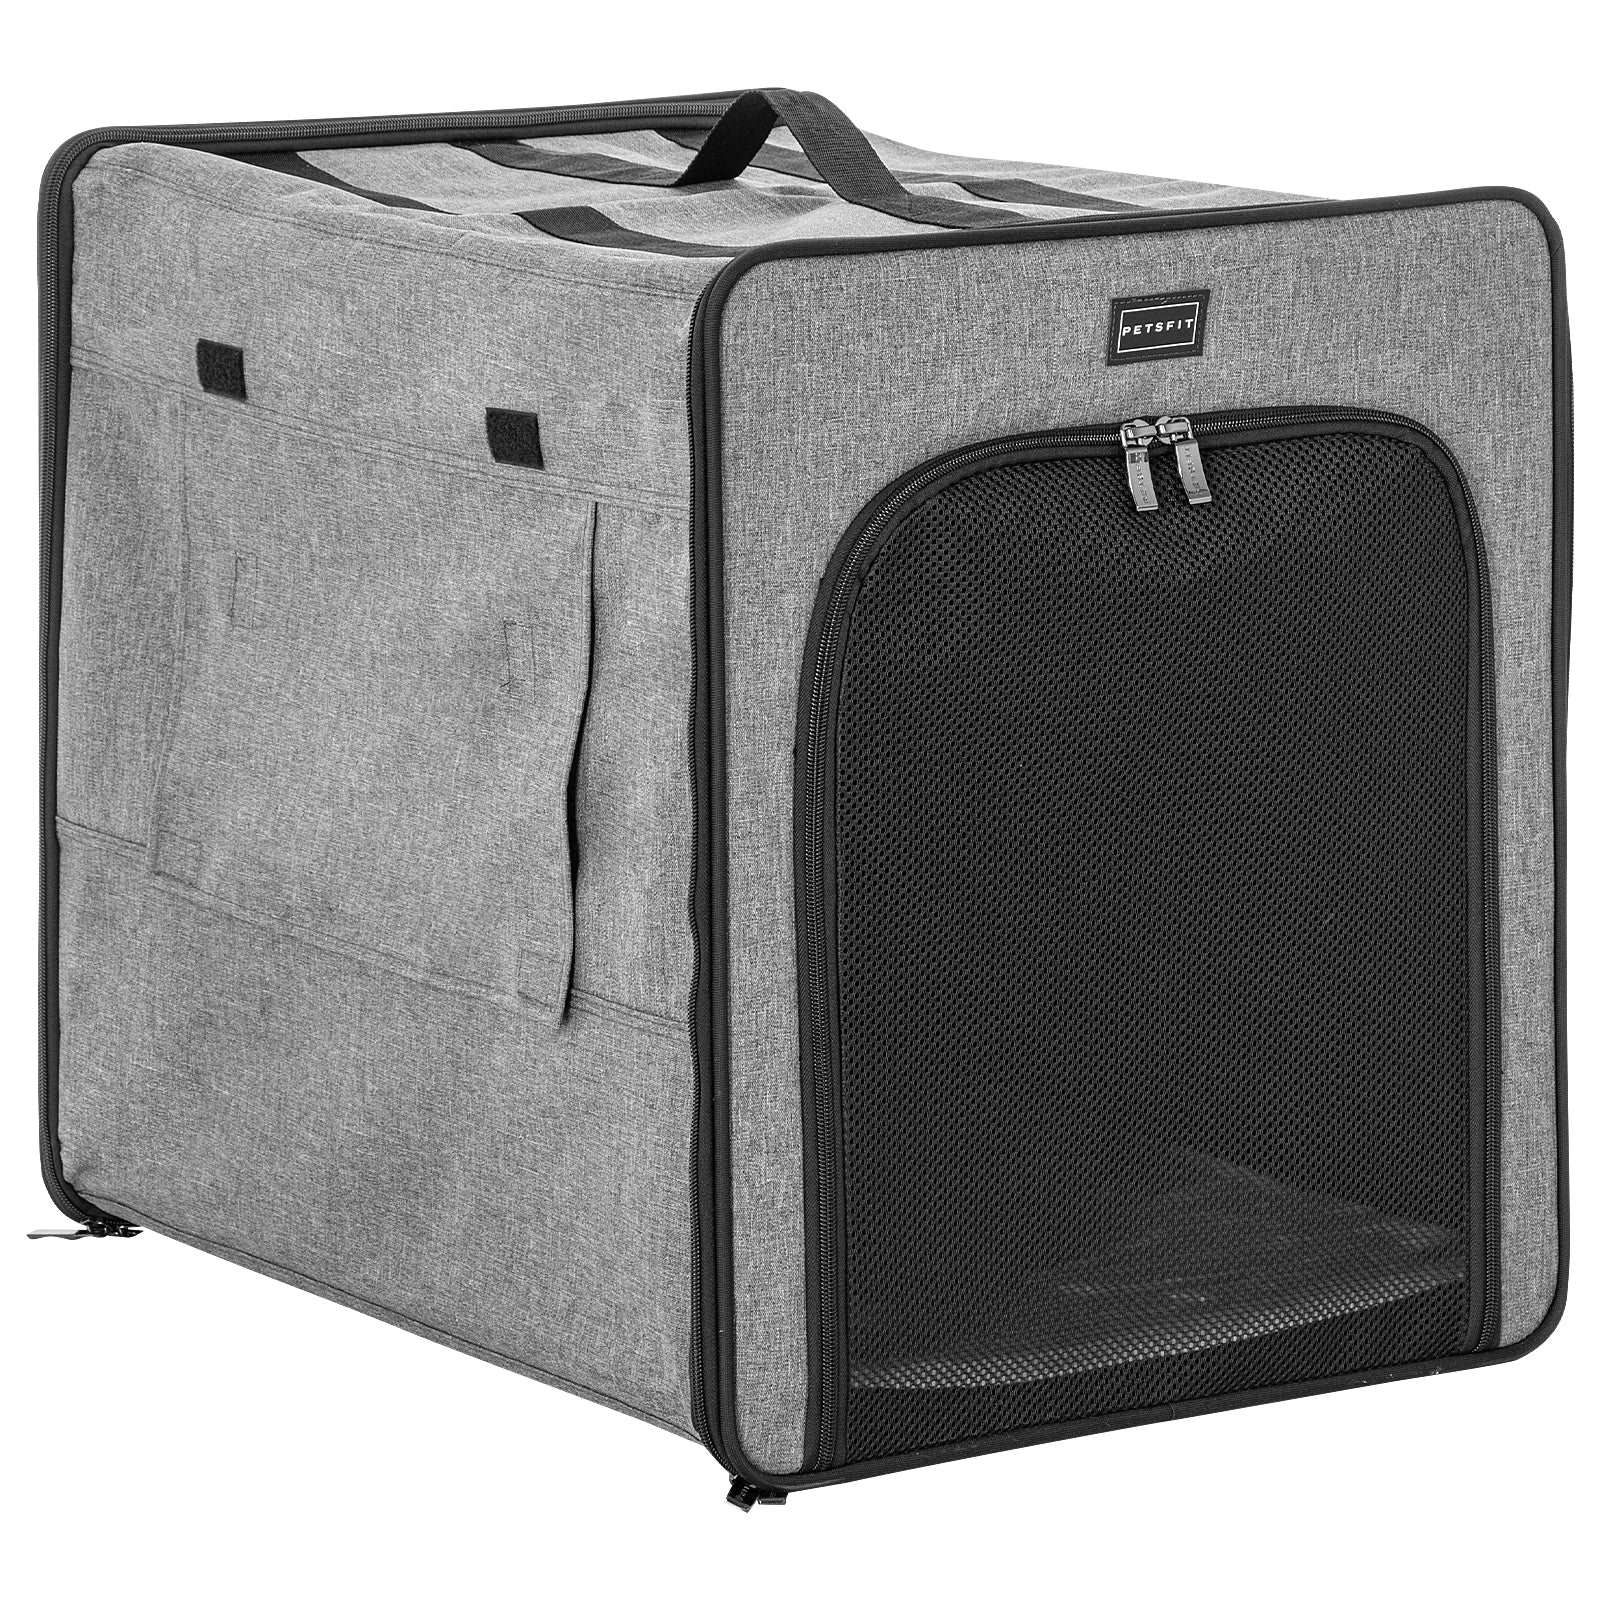 Petsfit-Sturdy-Wire-Frame-Soft-Pet-Crate-Collapsible-for-Travel-09